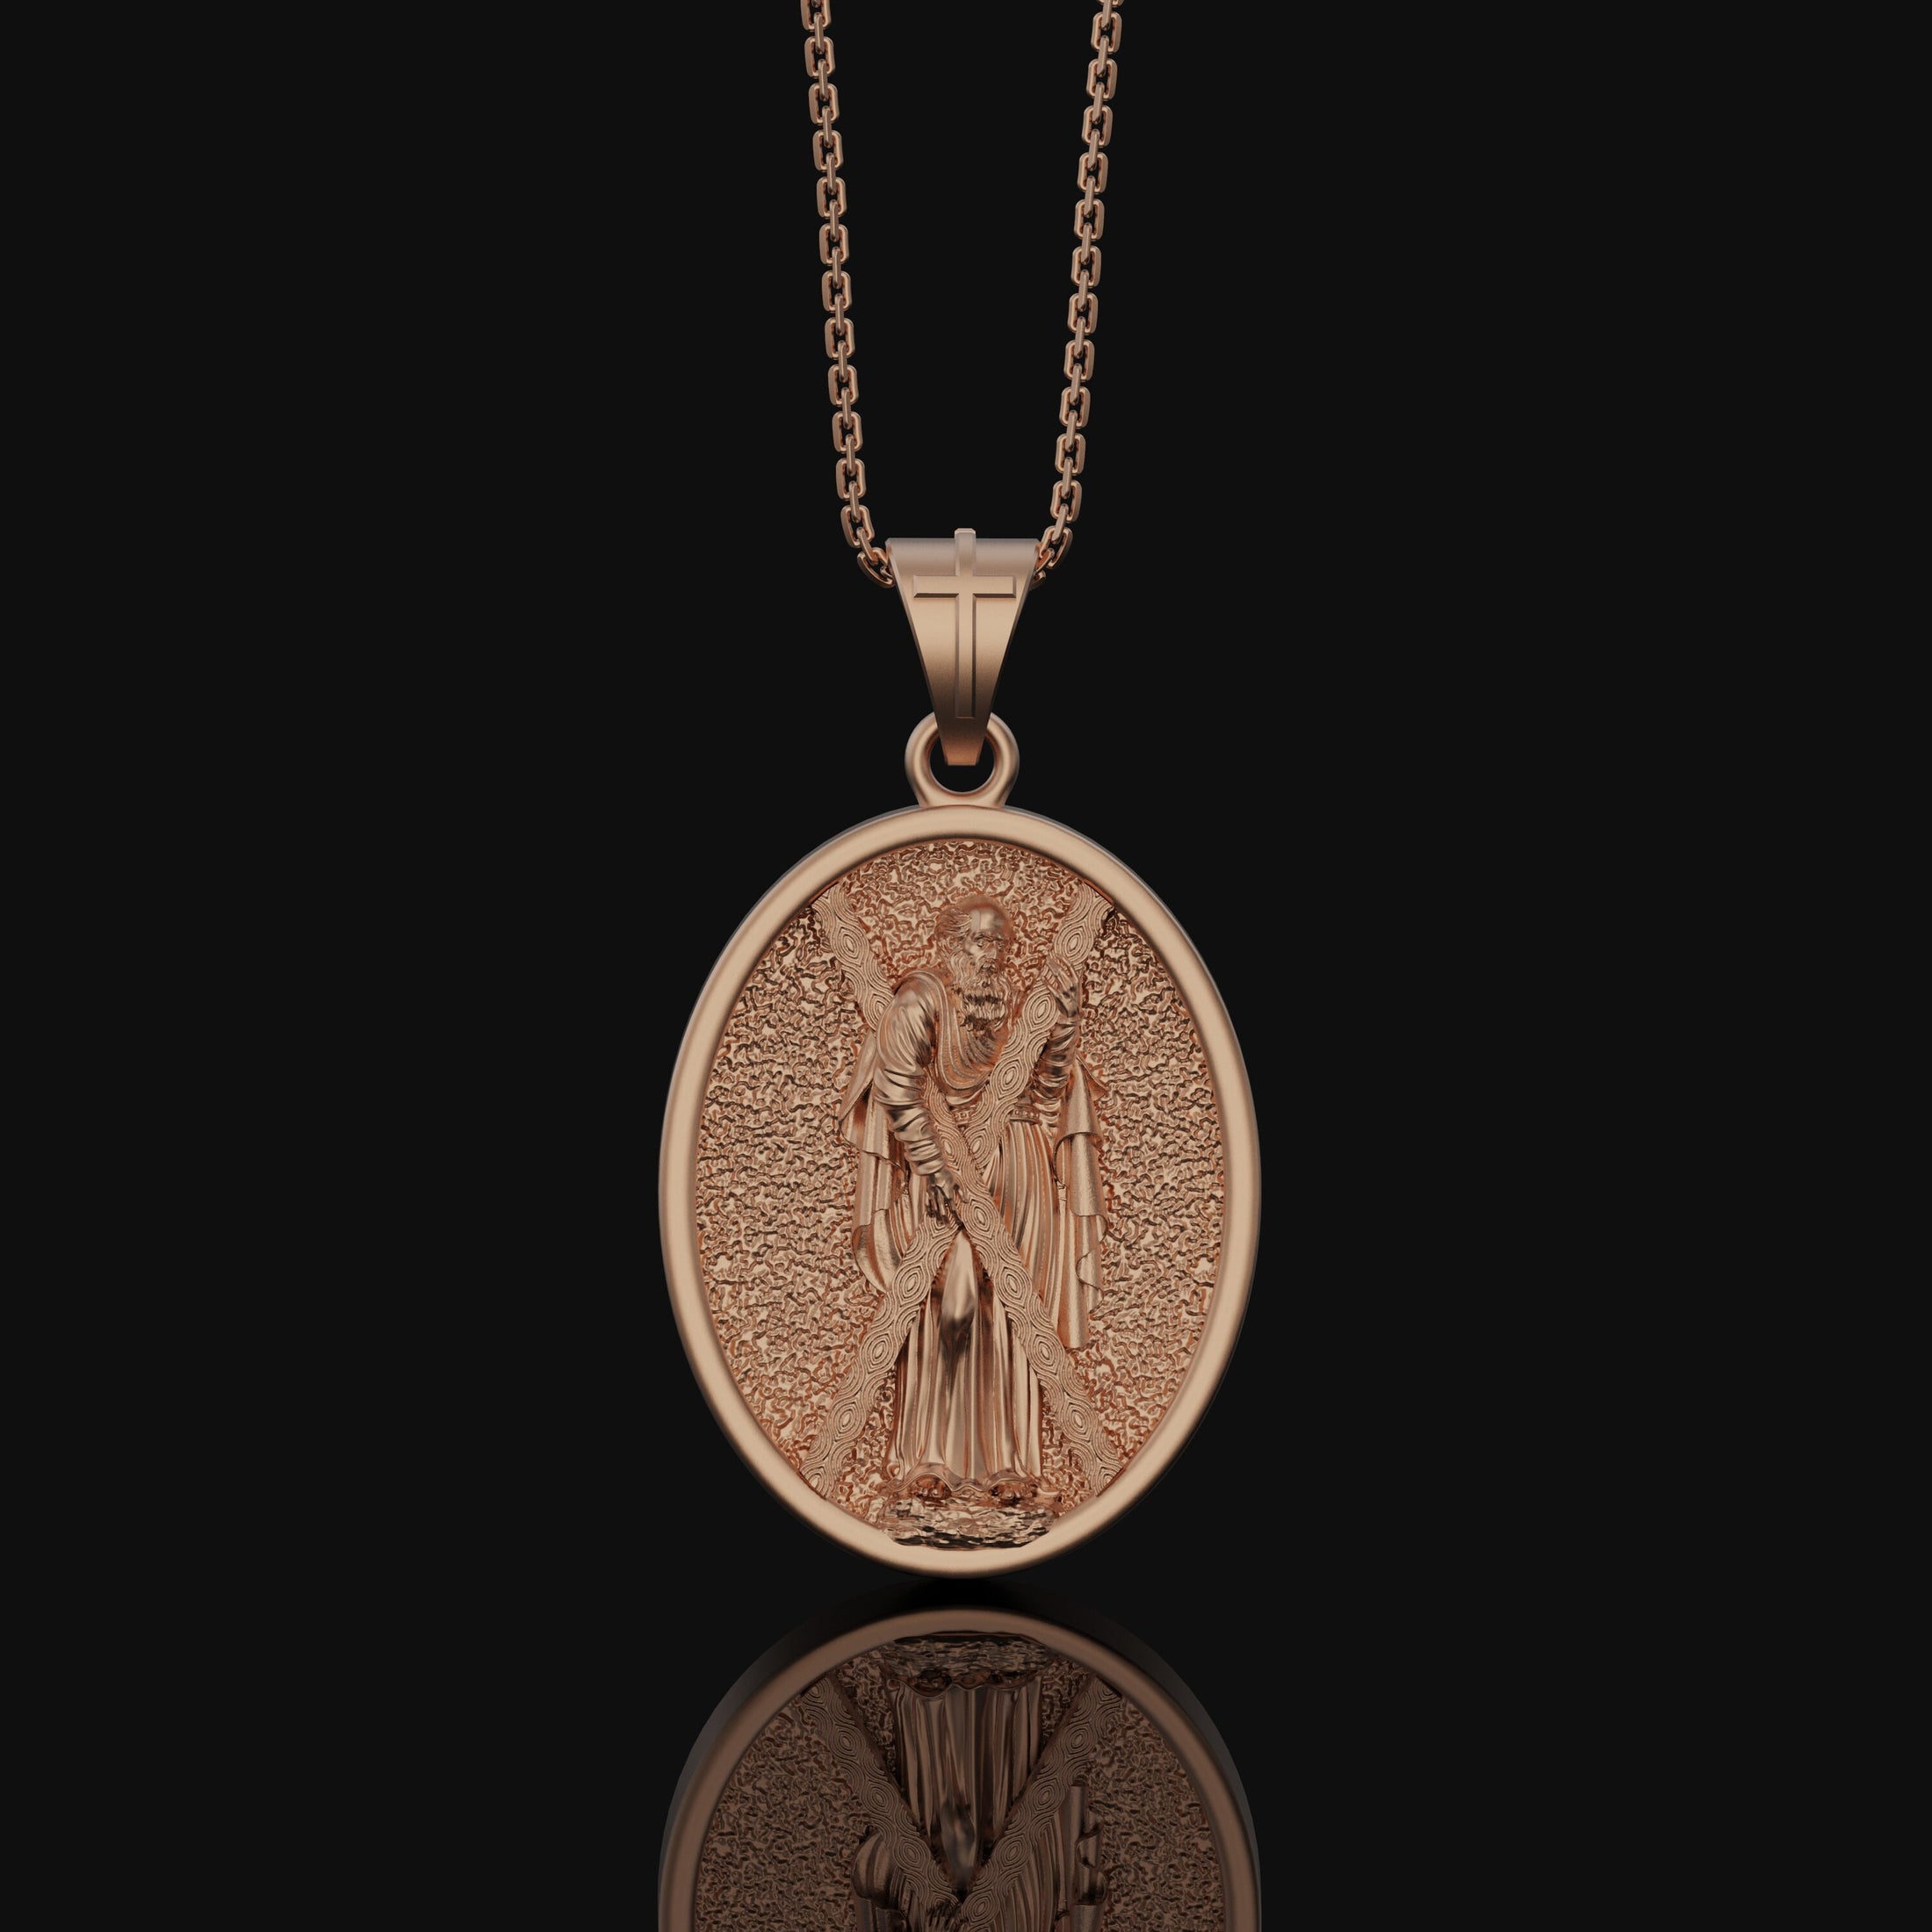 St Andrew Medal, Patron Saint Medal, Andrew The Apostle, Religious Medals Jewelry, Catholic Necklace, Confirmation Gift Rose Gold Finish